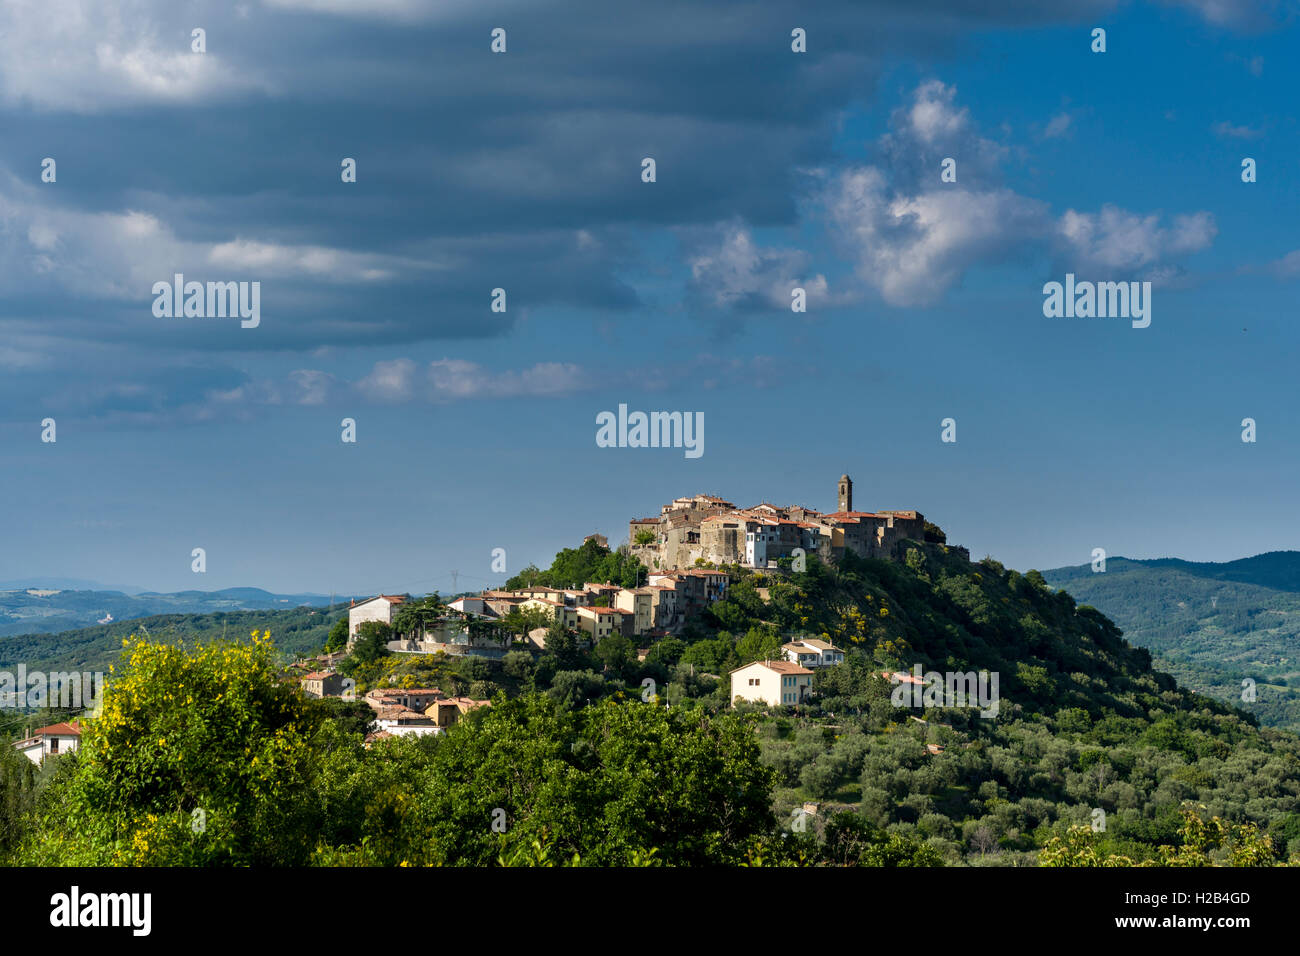 Typical Tuscany landscape with hills and trees, View of a town on a hill, Montegiovi, Tuscany, Italy Stock Photo